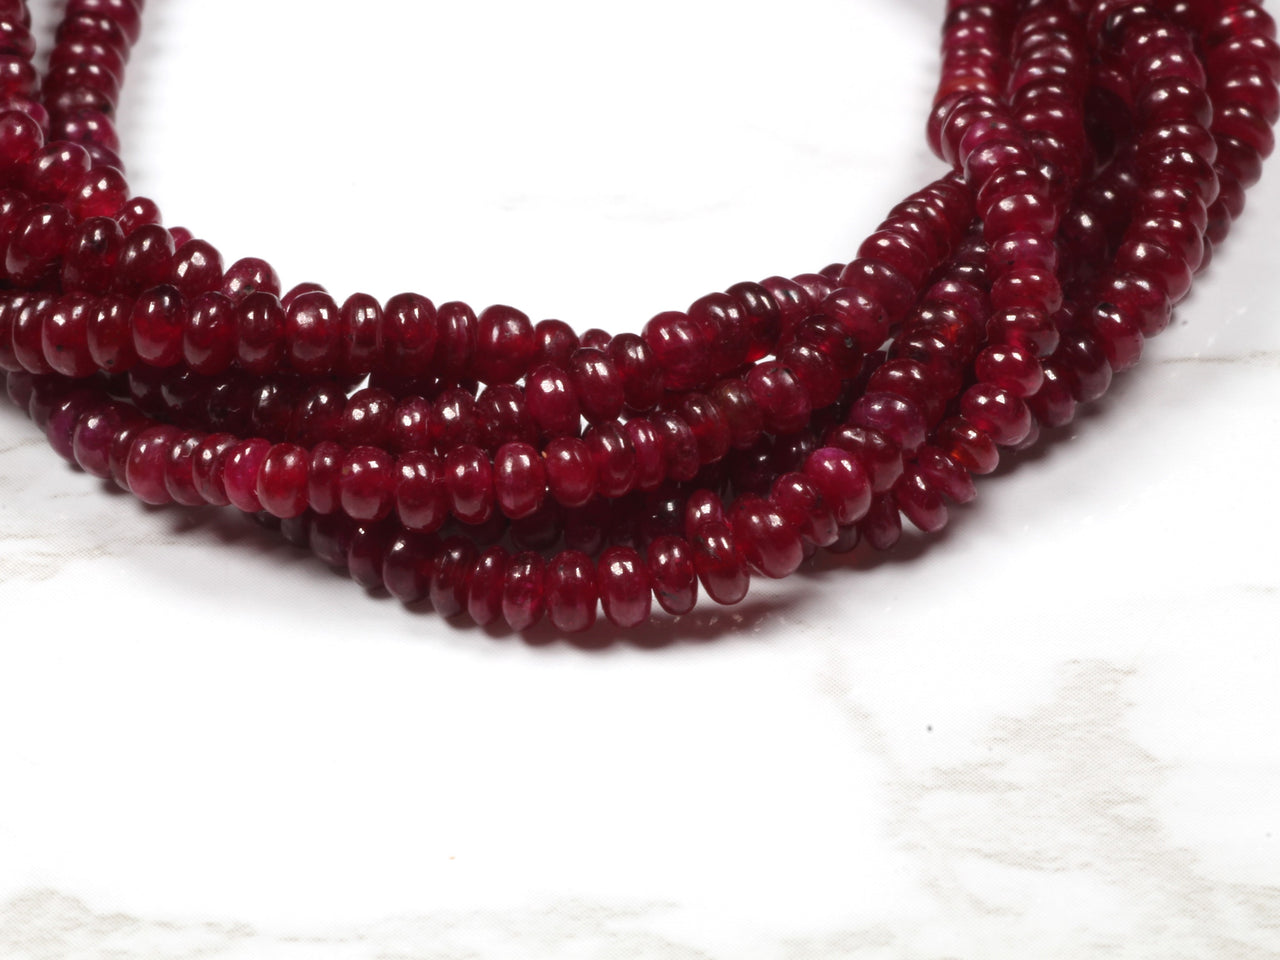 Red Ruby 3mm - 4mm Smooth Rondelles Bead Strand